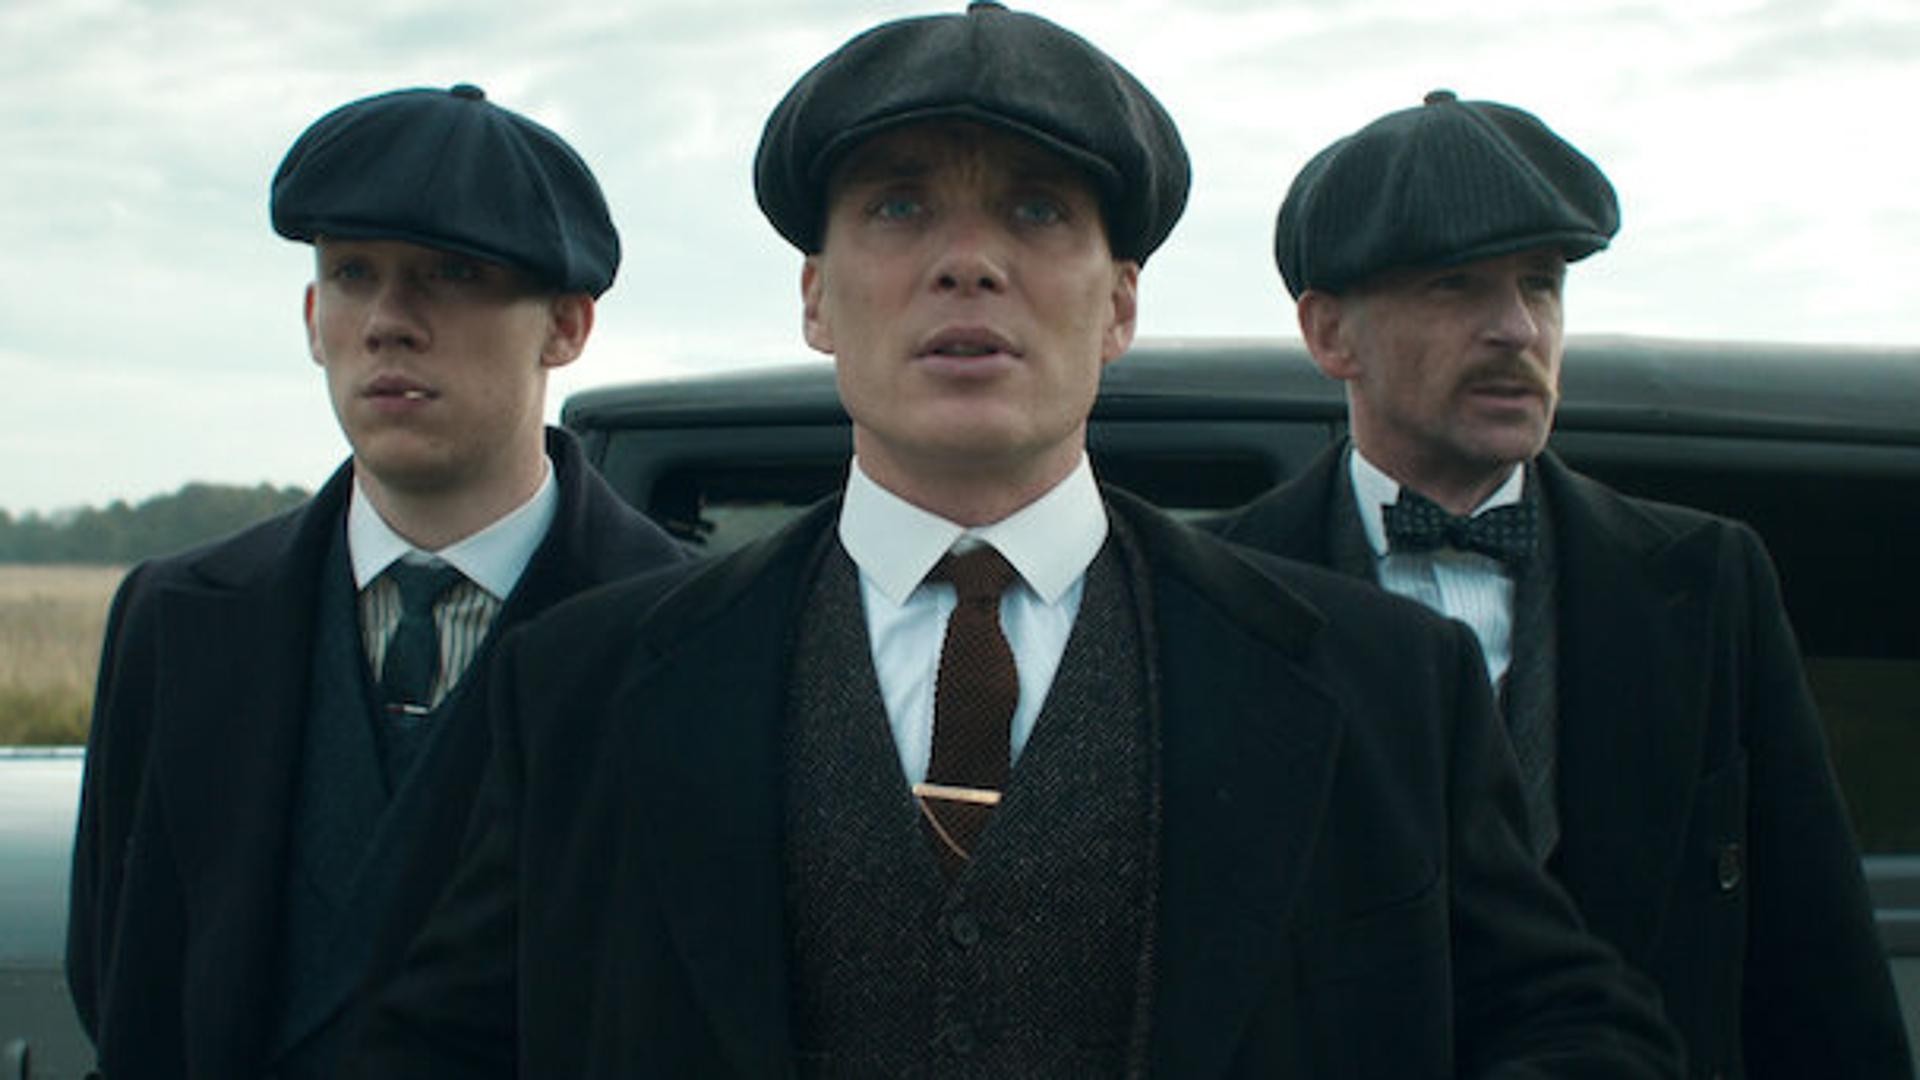 Production company behind Peaky Blinders acquired 